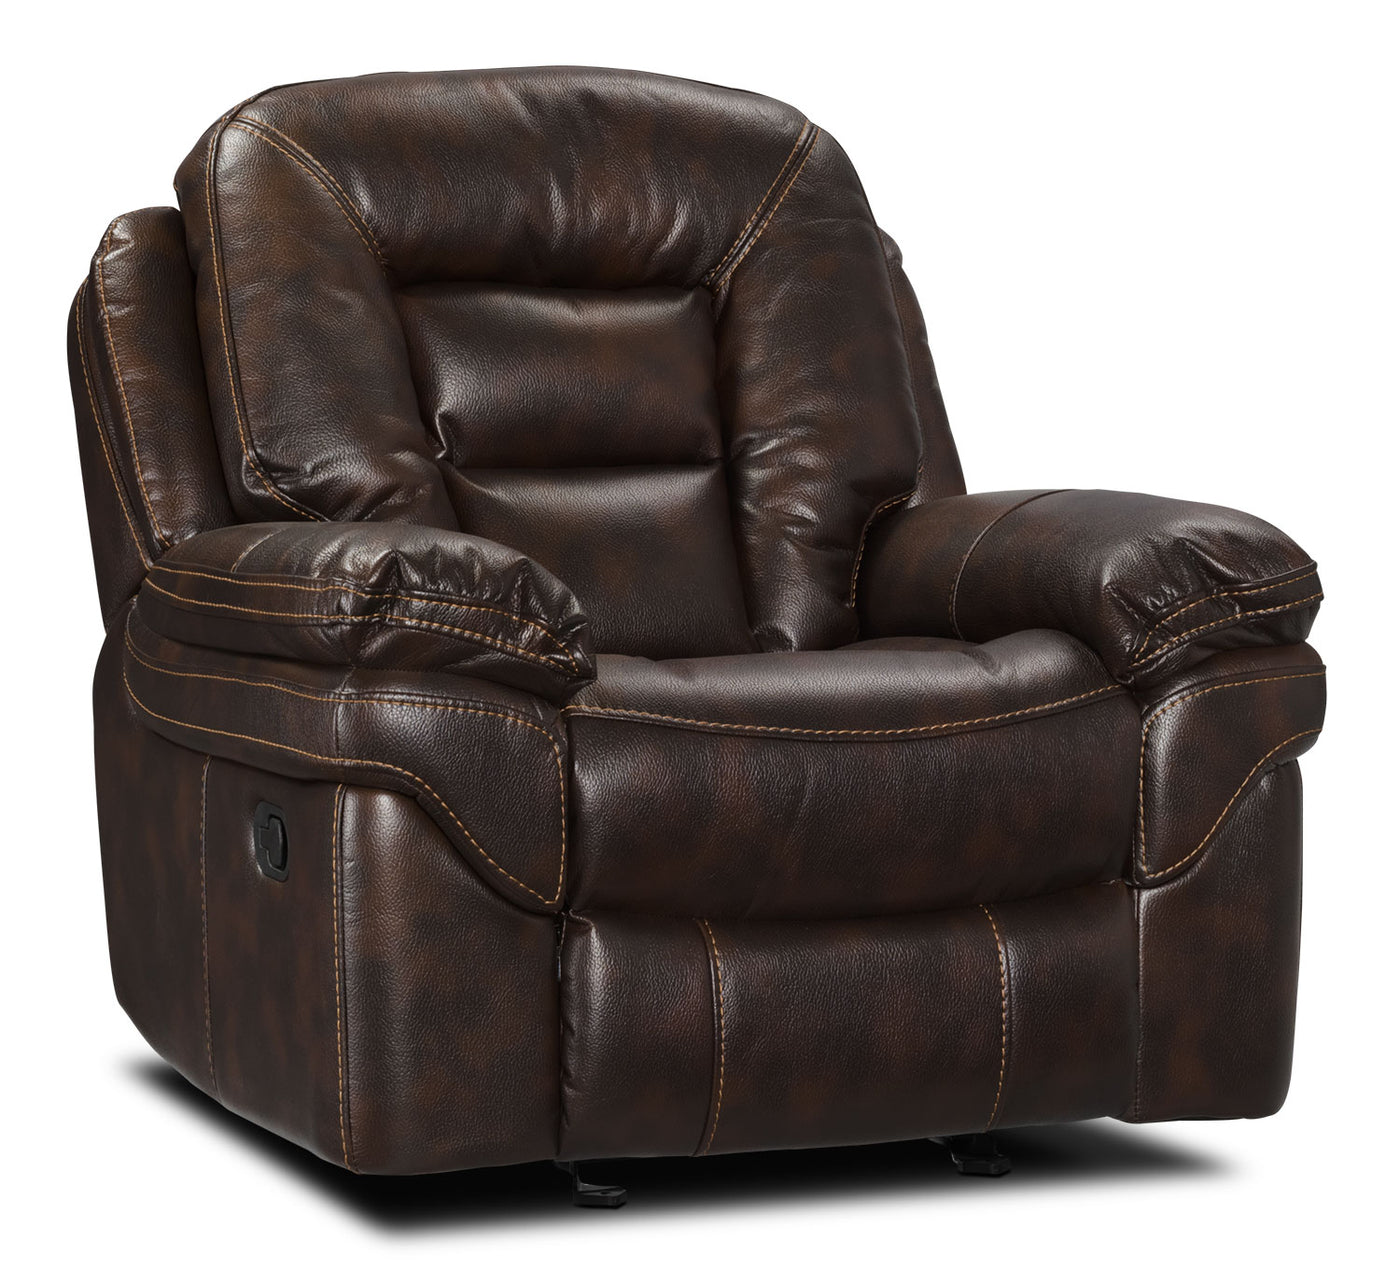 Leo Leathaire Recliner Walnut The Brick